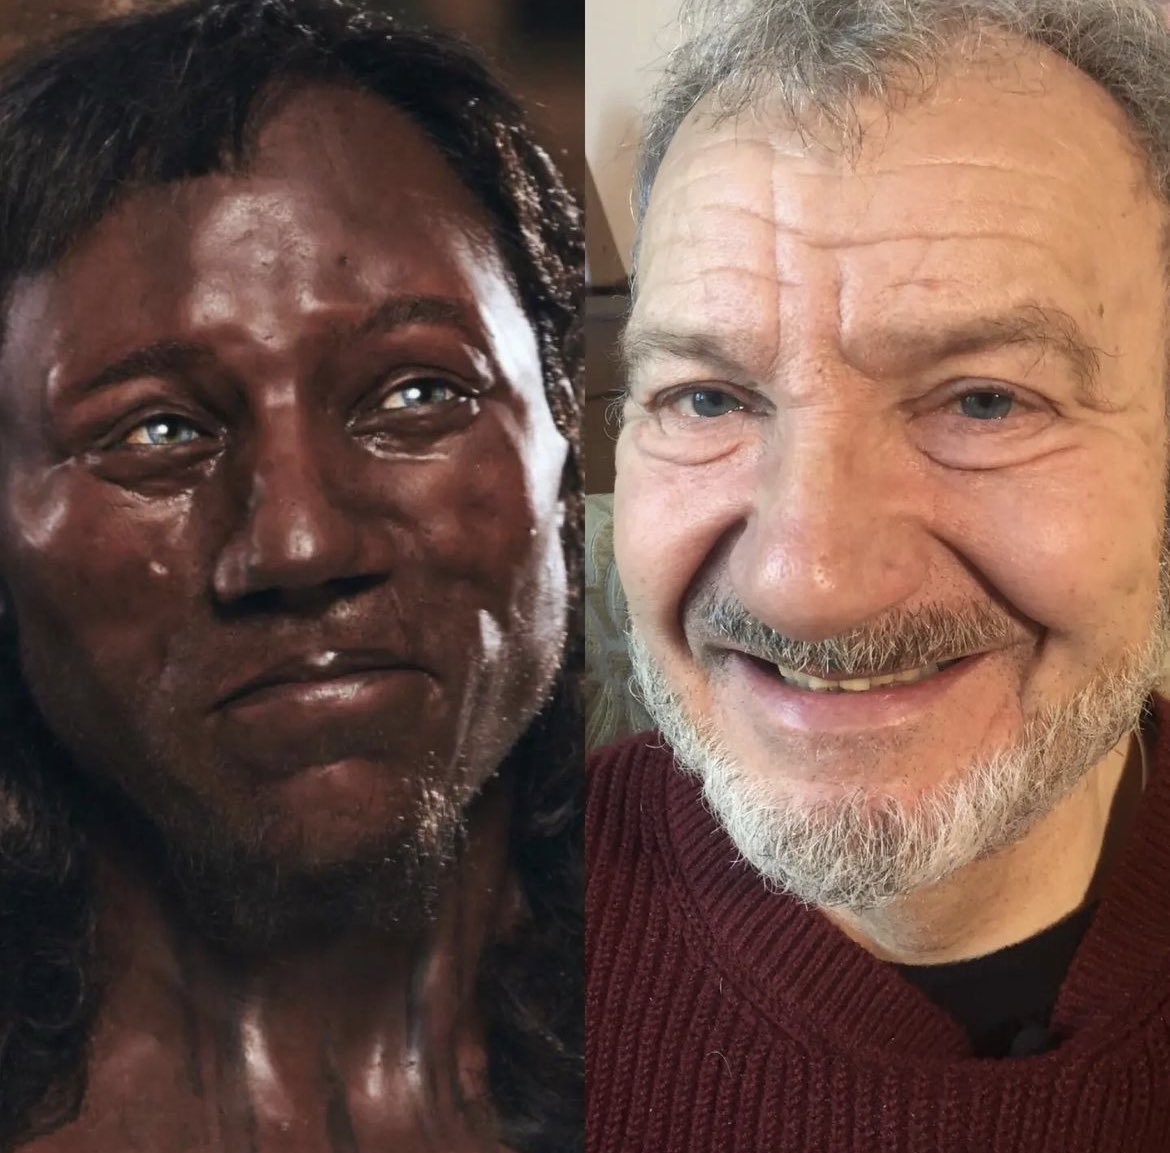 Introducing Cheddar Man, a man from 10,000 years ago whose descendant is alive today. Cheddar Man refers to an early Mesolithic individual discovered in Gough's cave in Cheddar, England, back in 1903. He is believed to have met a violent end in his twenties. Through DNA analysis,…